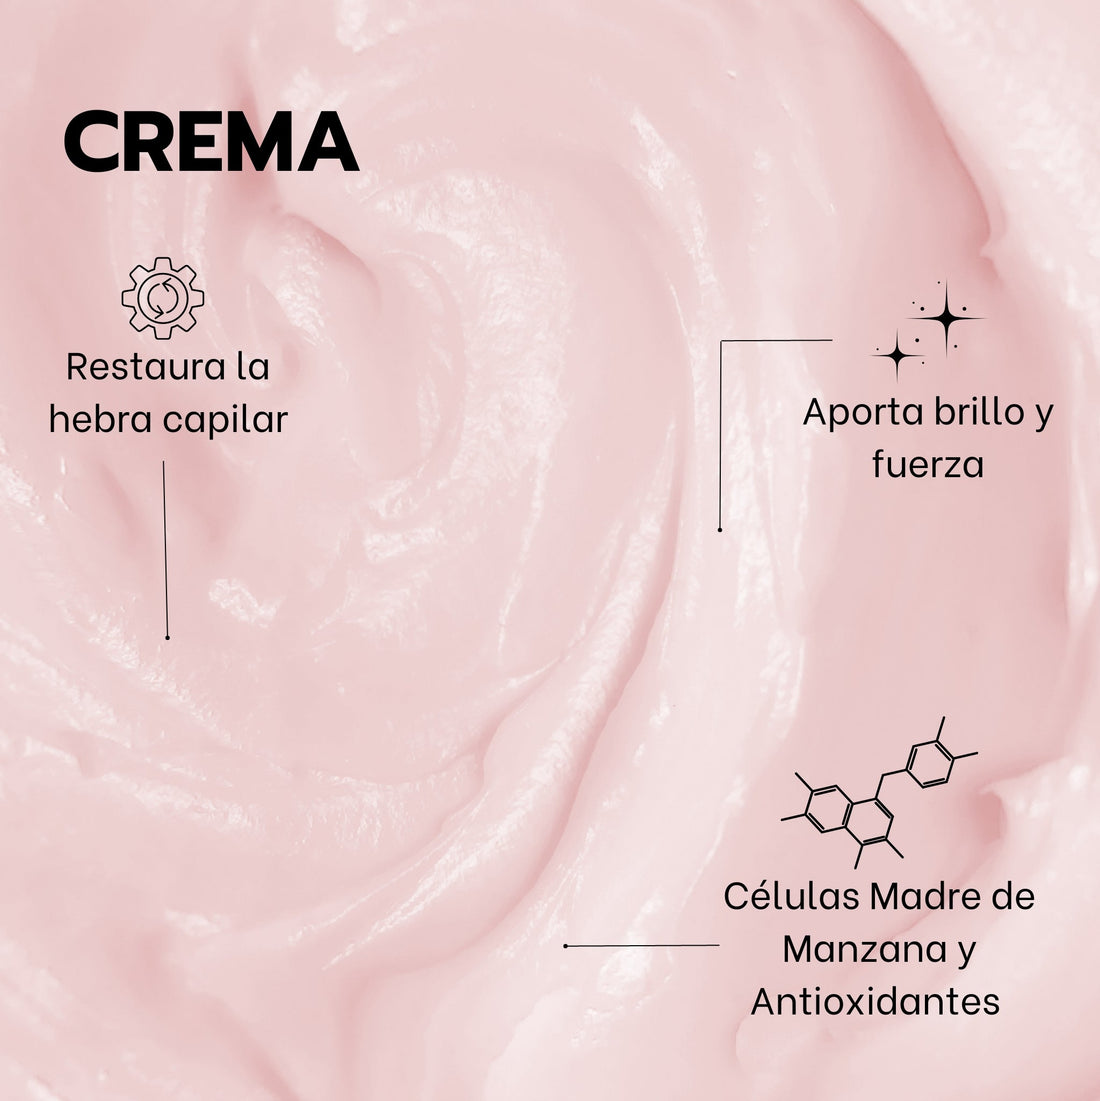 Pack Intensivo Radiance Stem Cell + Champú y Máscara Protein